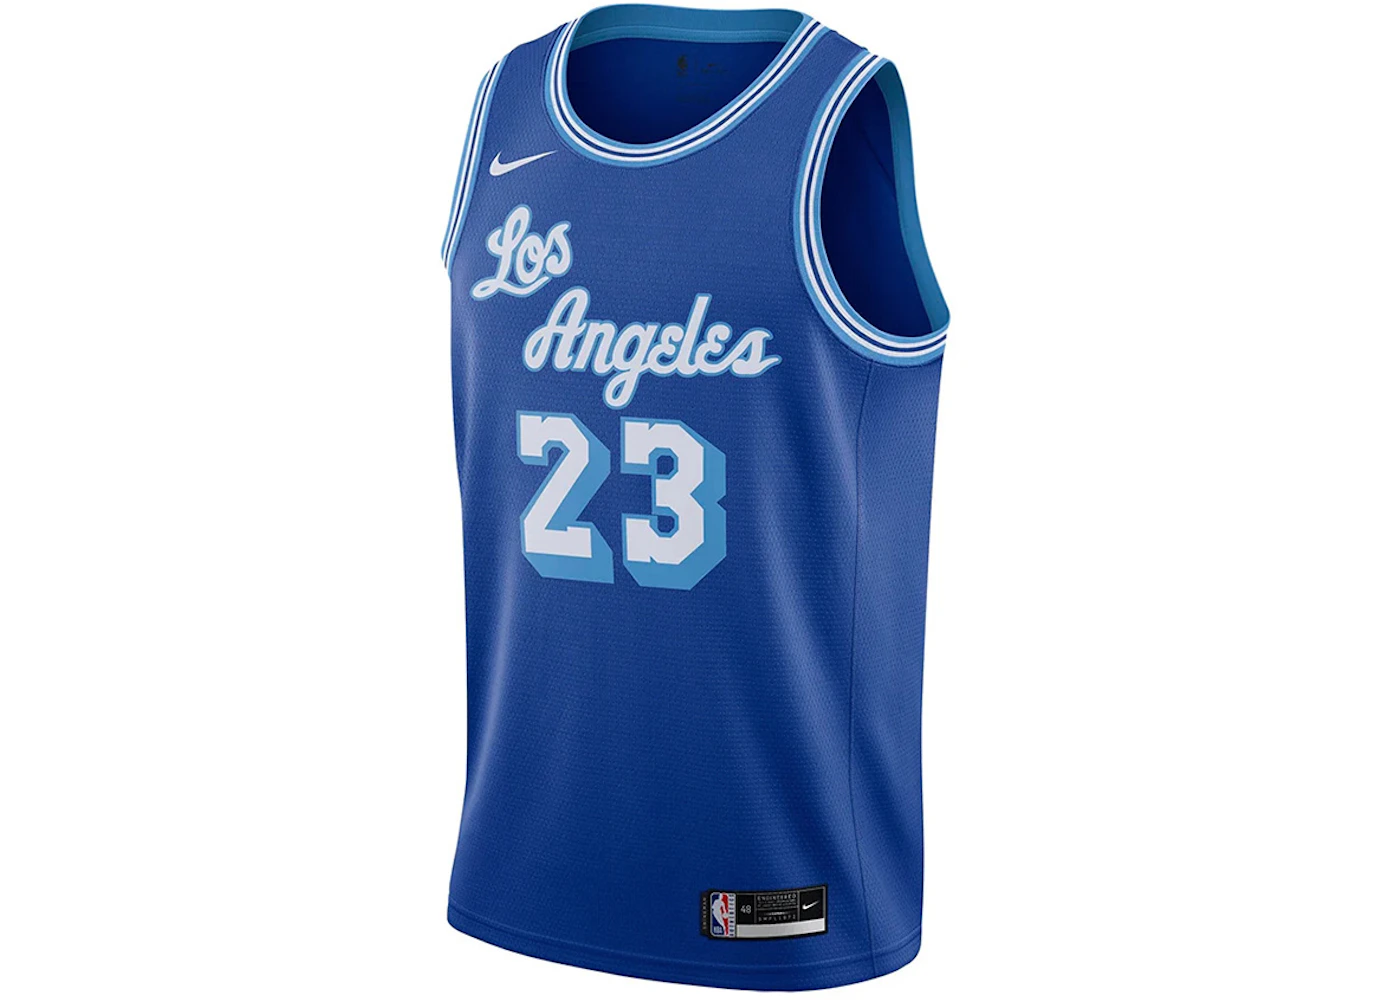 a lakers jersey